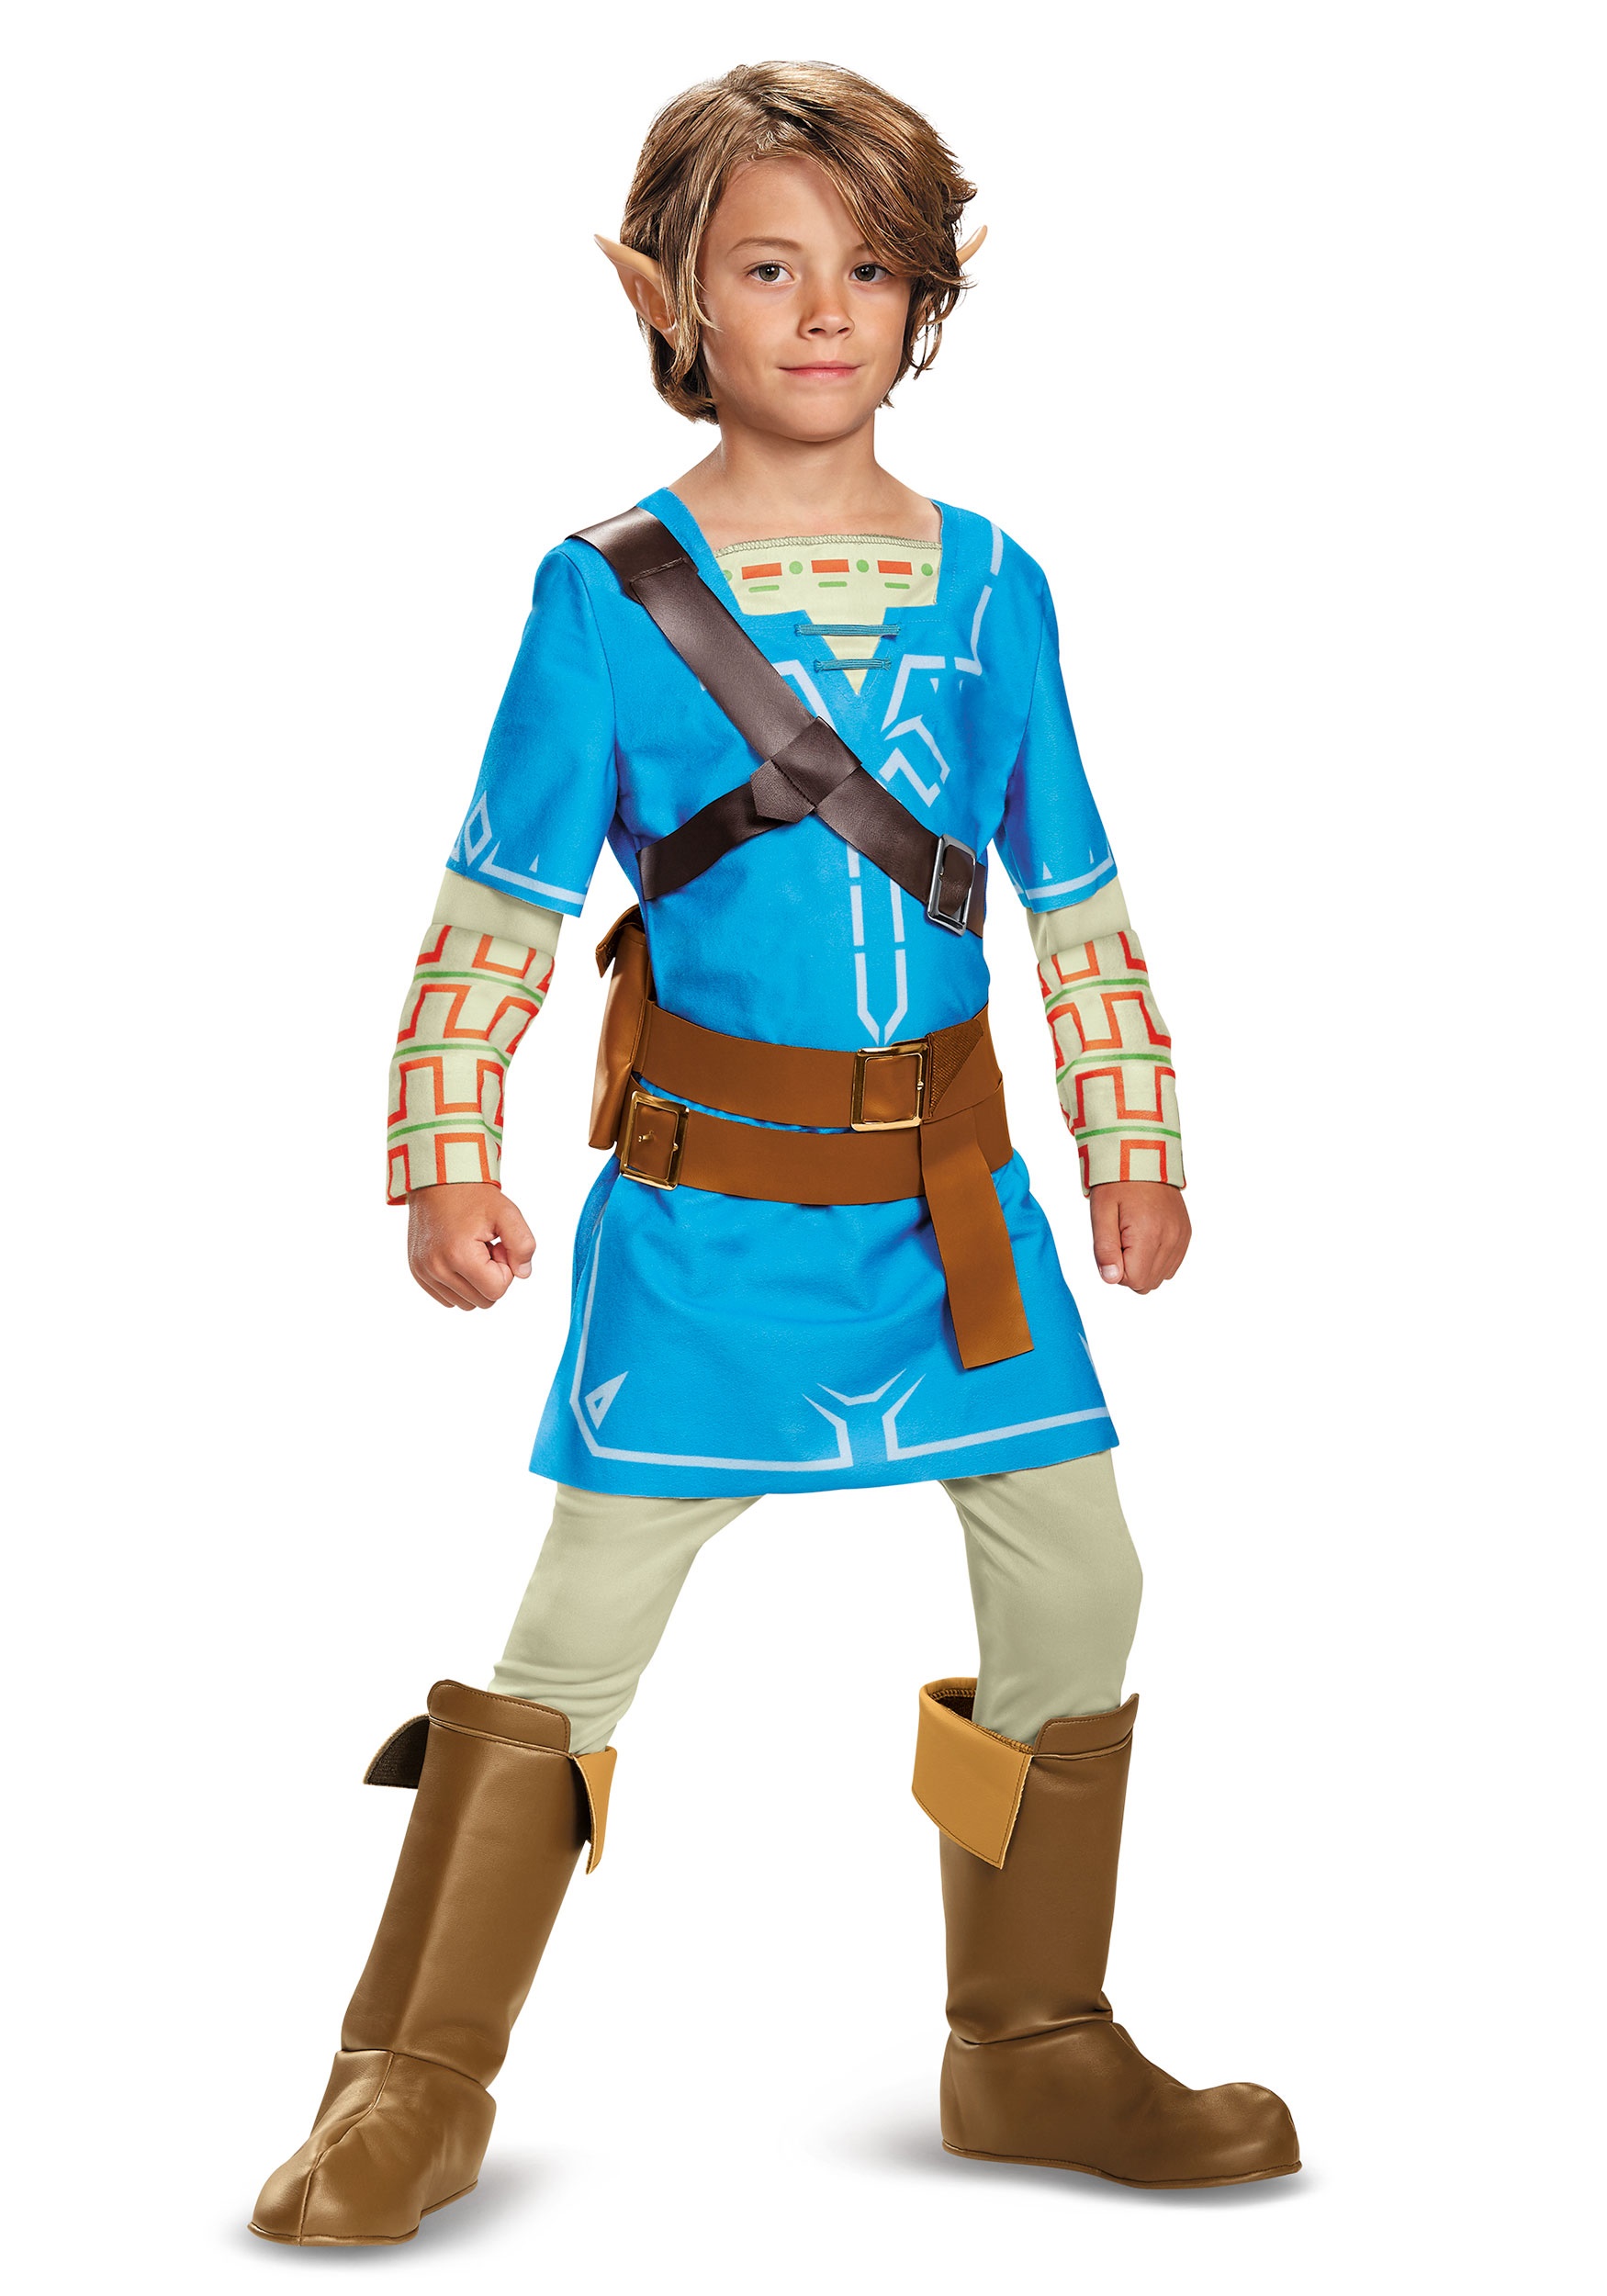 Link Breath of the Wild Deluxe Costume for Kids